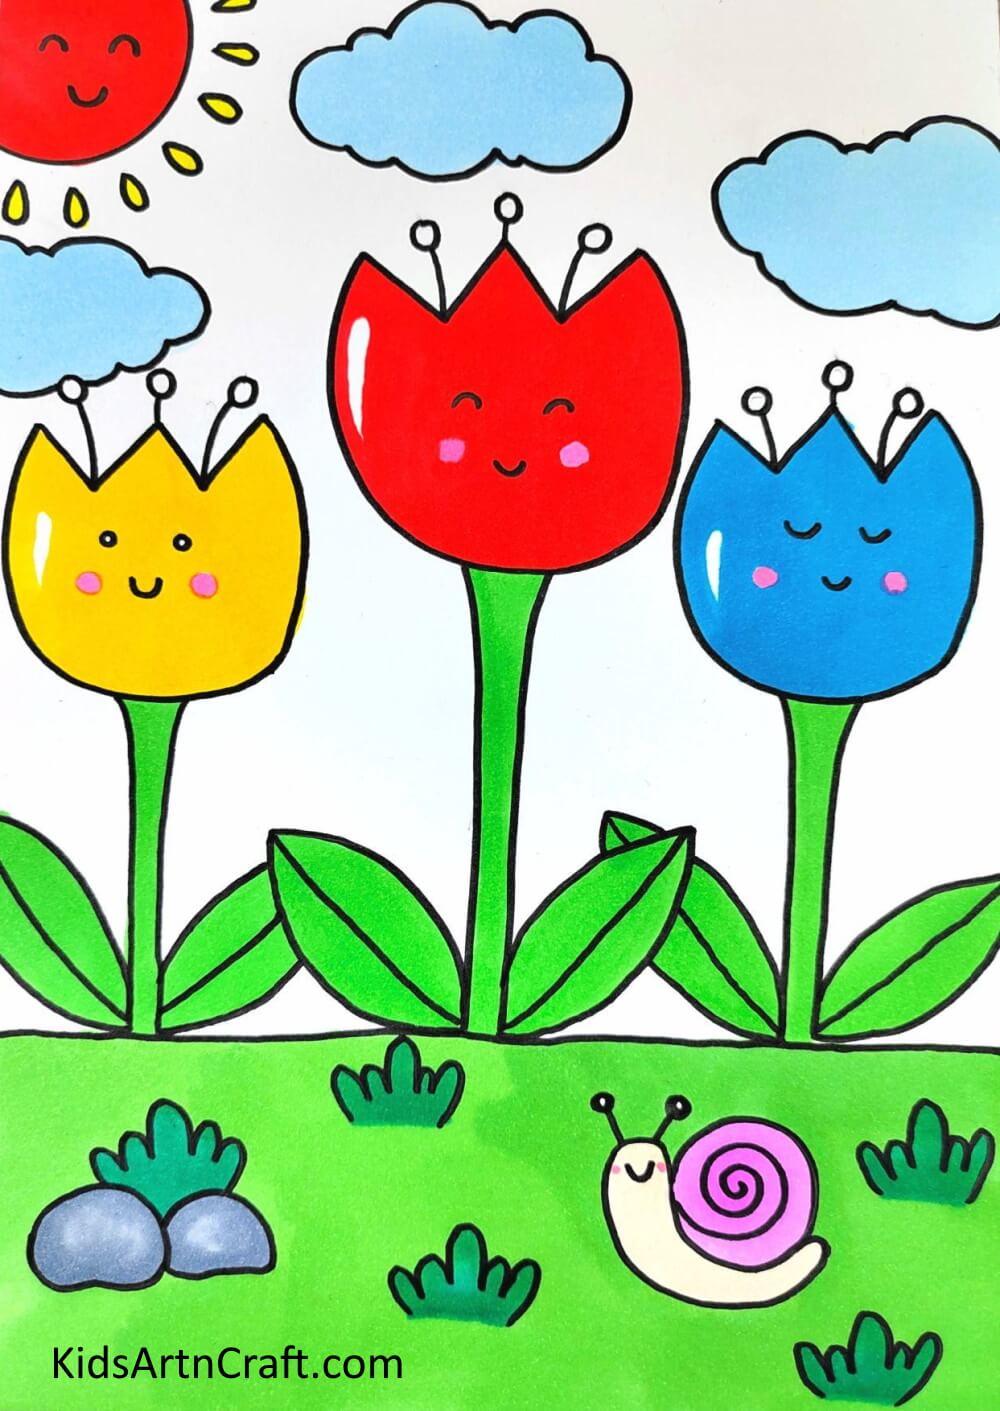 Coloring The Drawing Painting tulips is a simple project for kids to do at home.